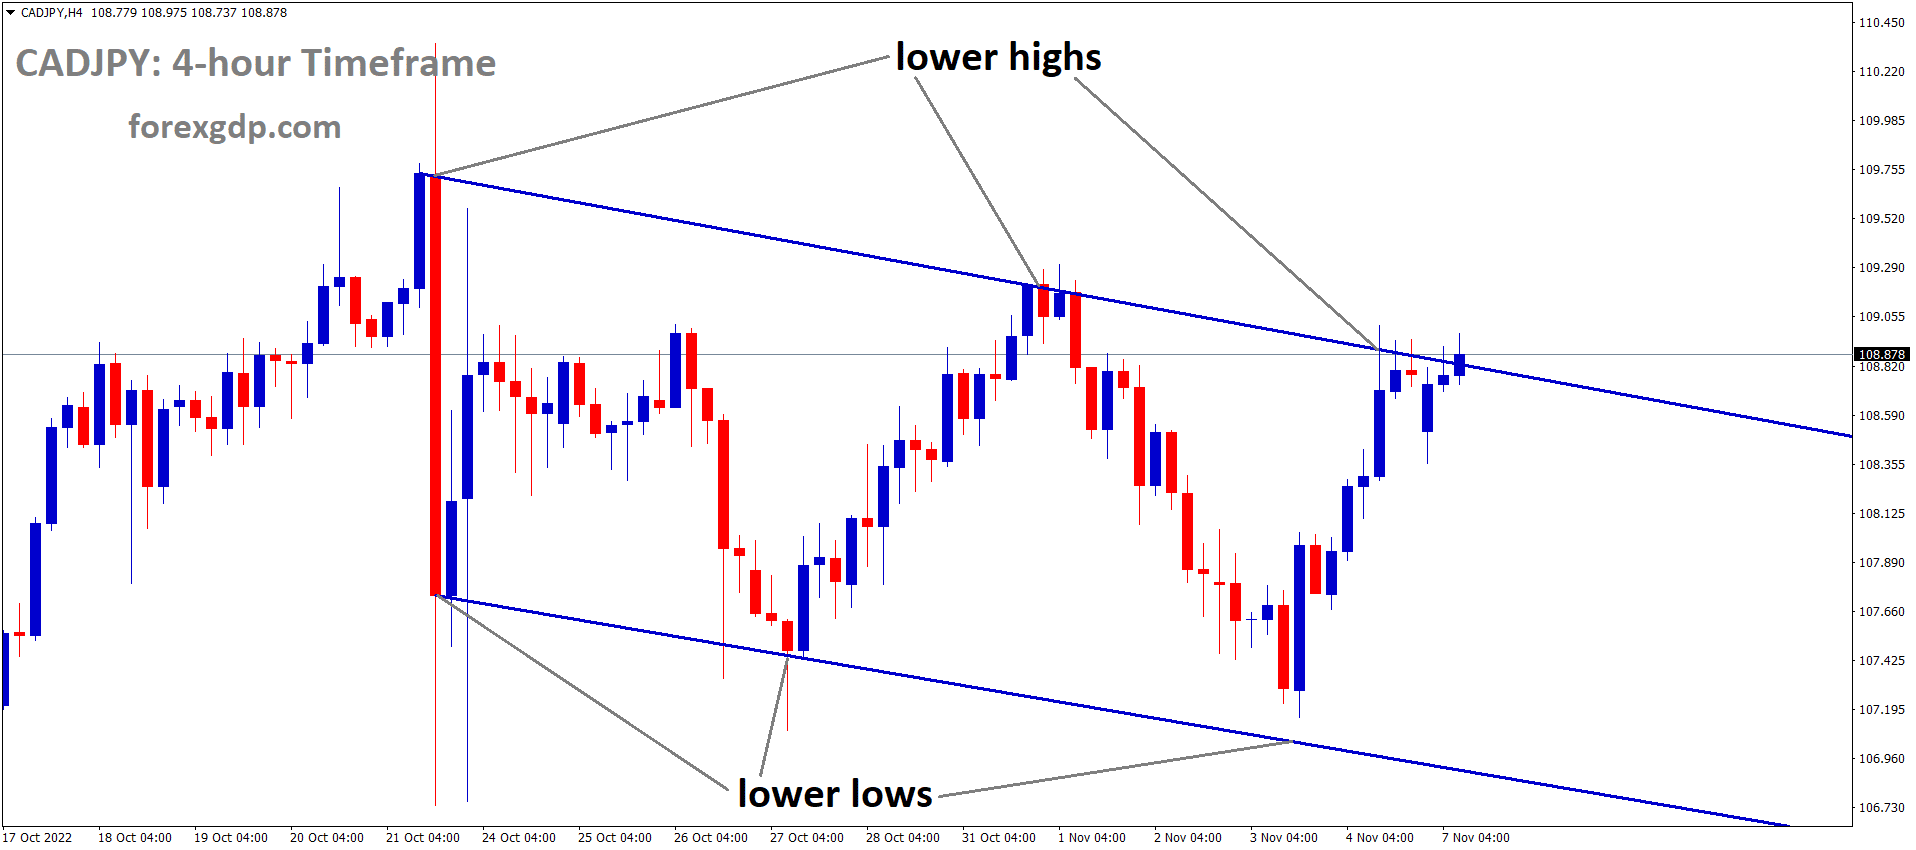 CADJPY is moving in the Descending channel and the market has reached the lower high area of the channel